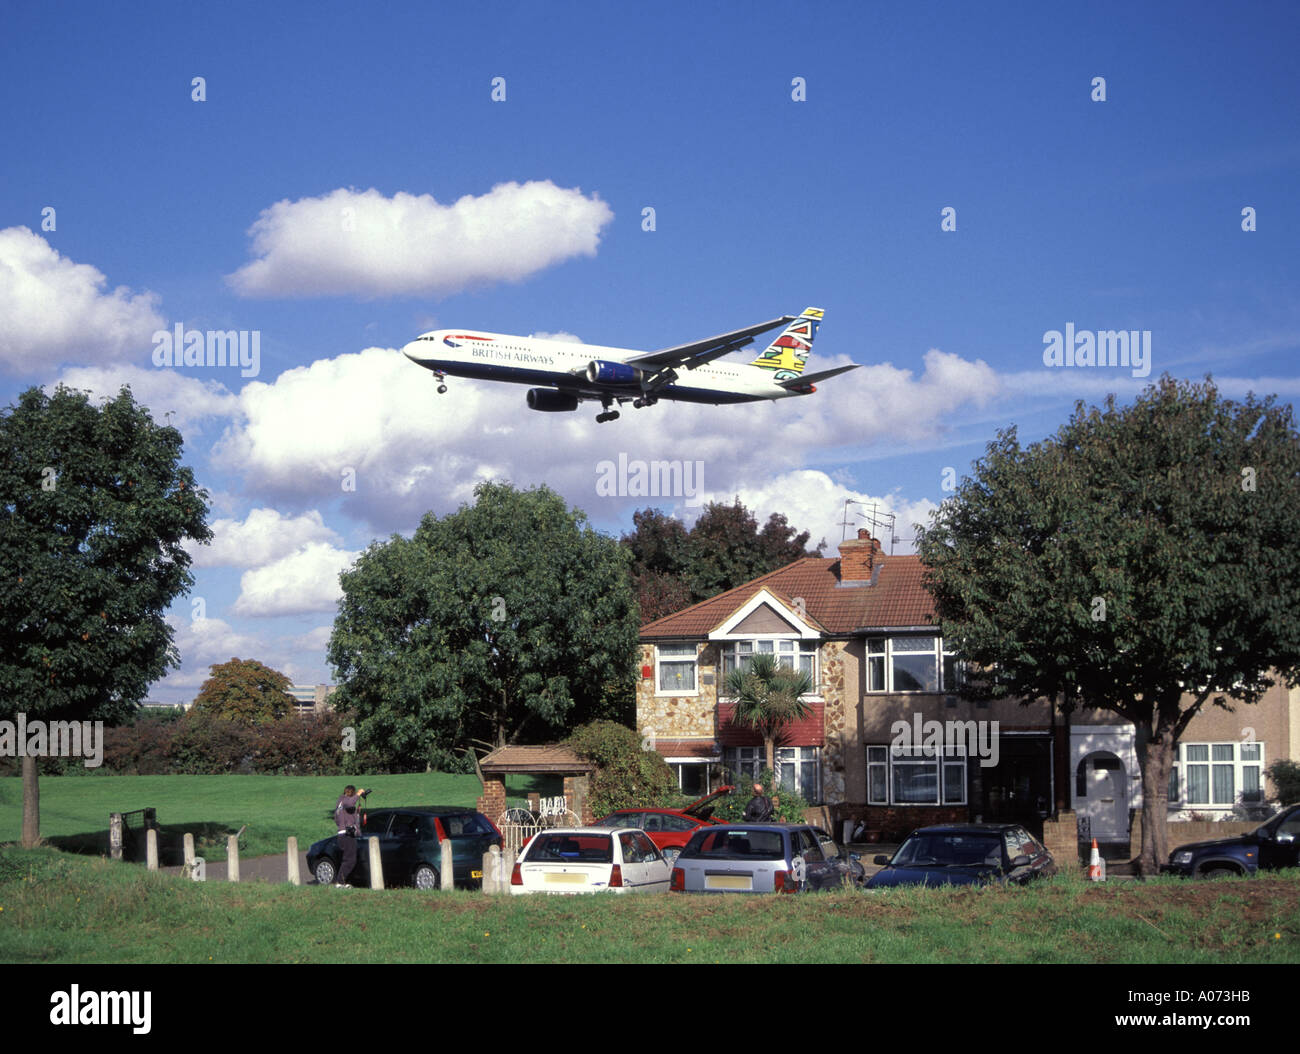 London Airport perimeter British Airways low flying passenger jet approaches runway above residential housing Stock Photo